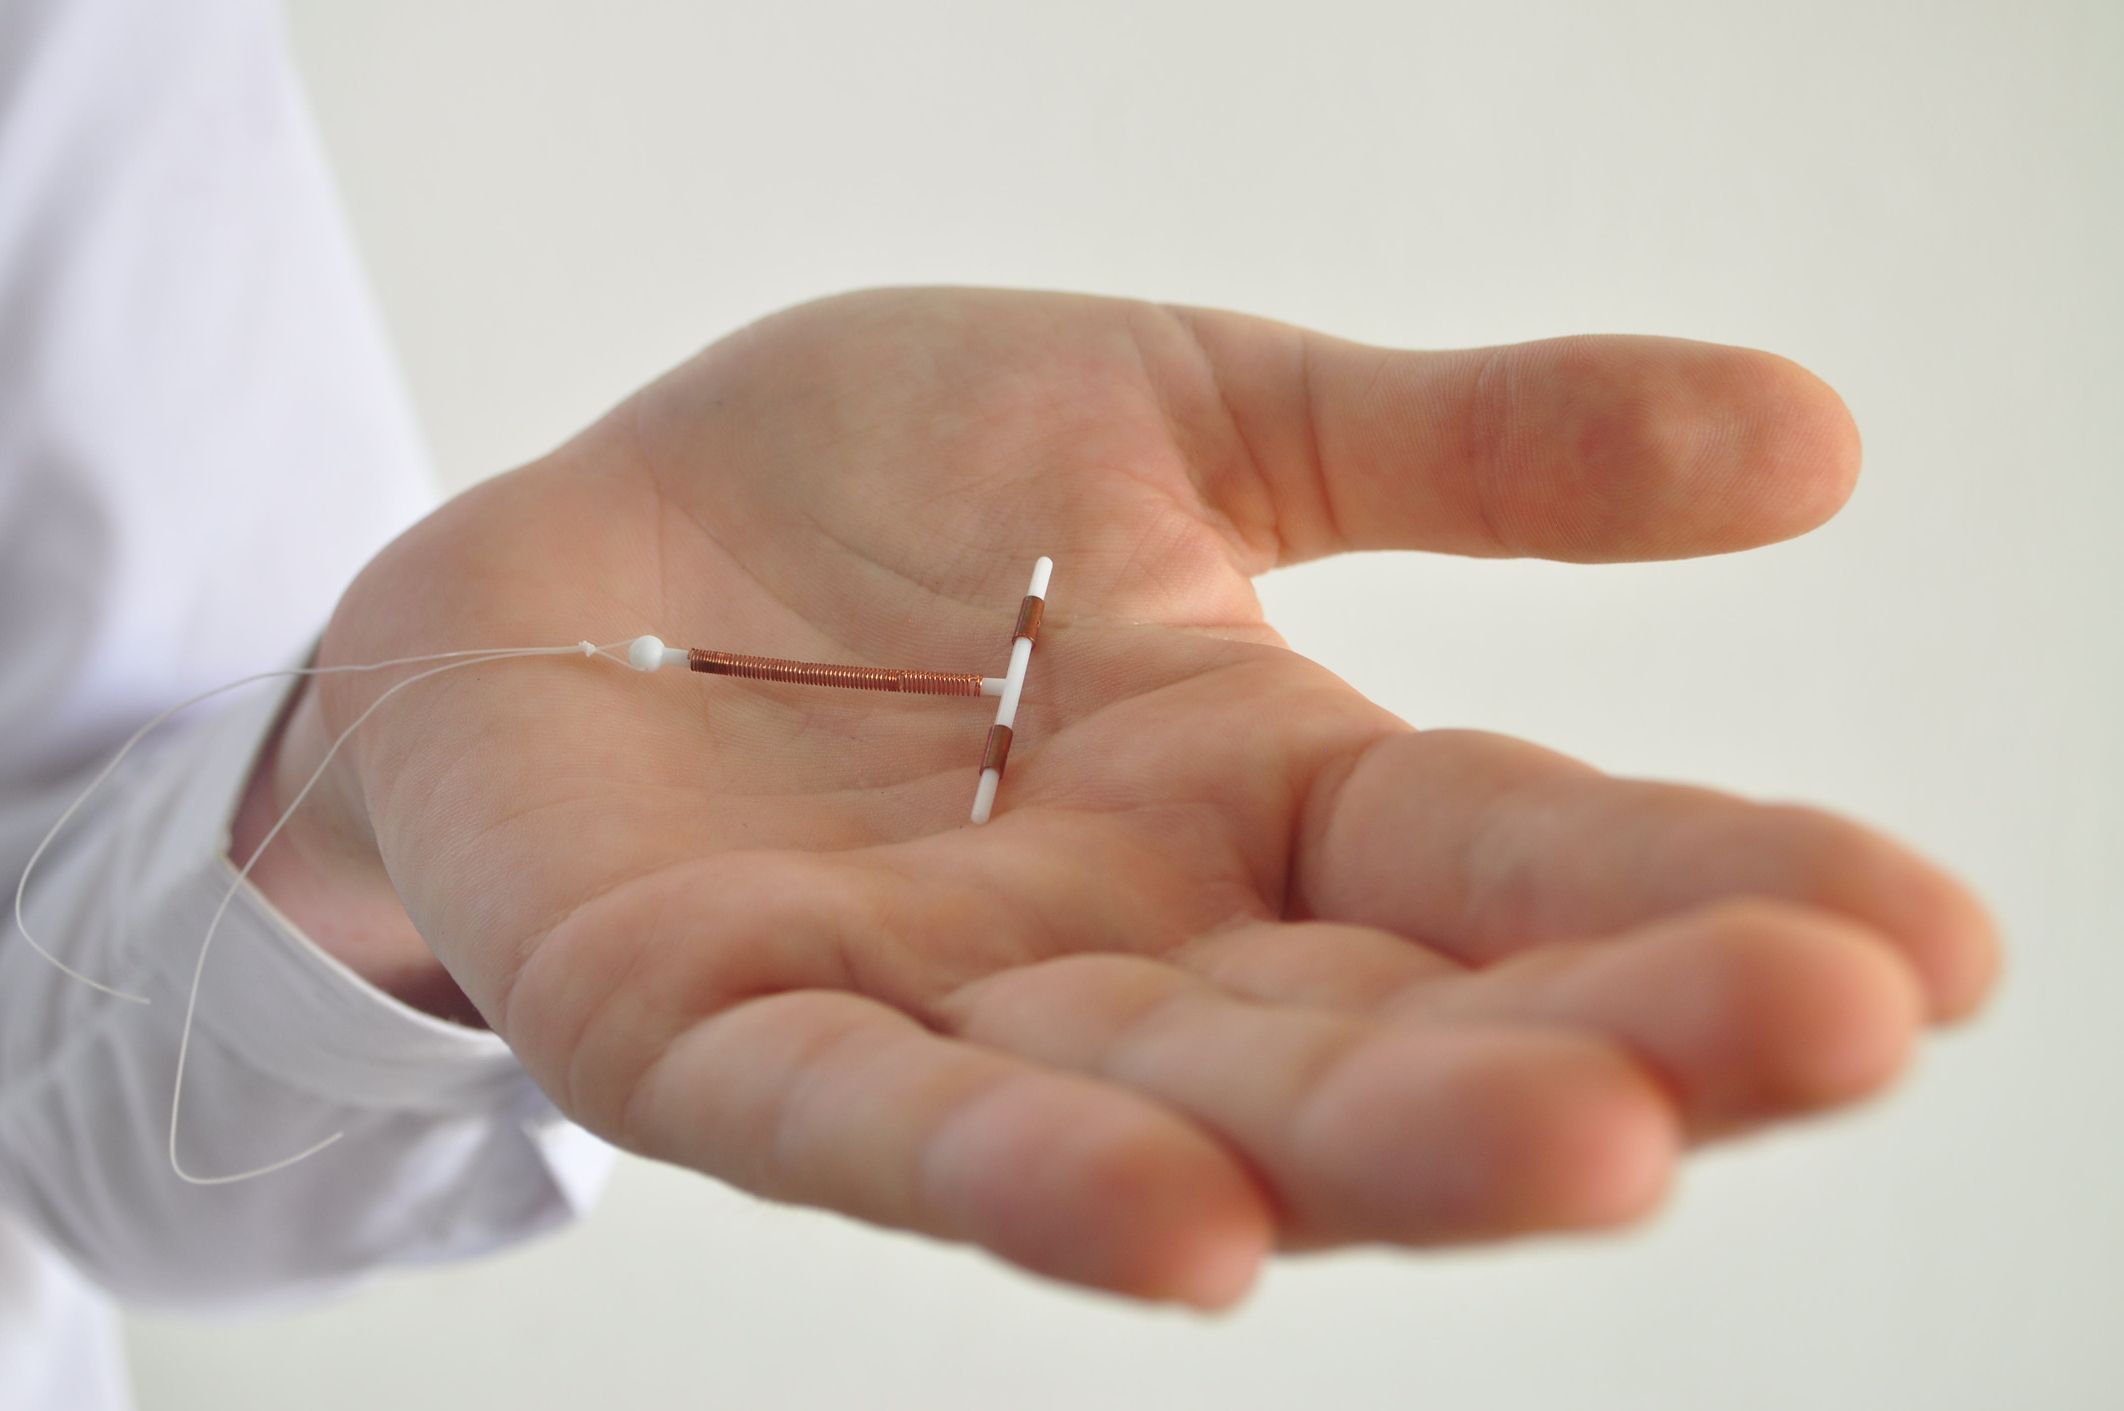 iud contrapcetion stock getty 